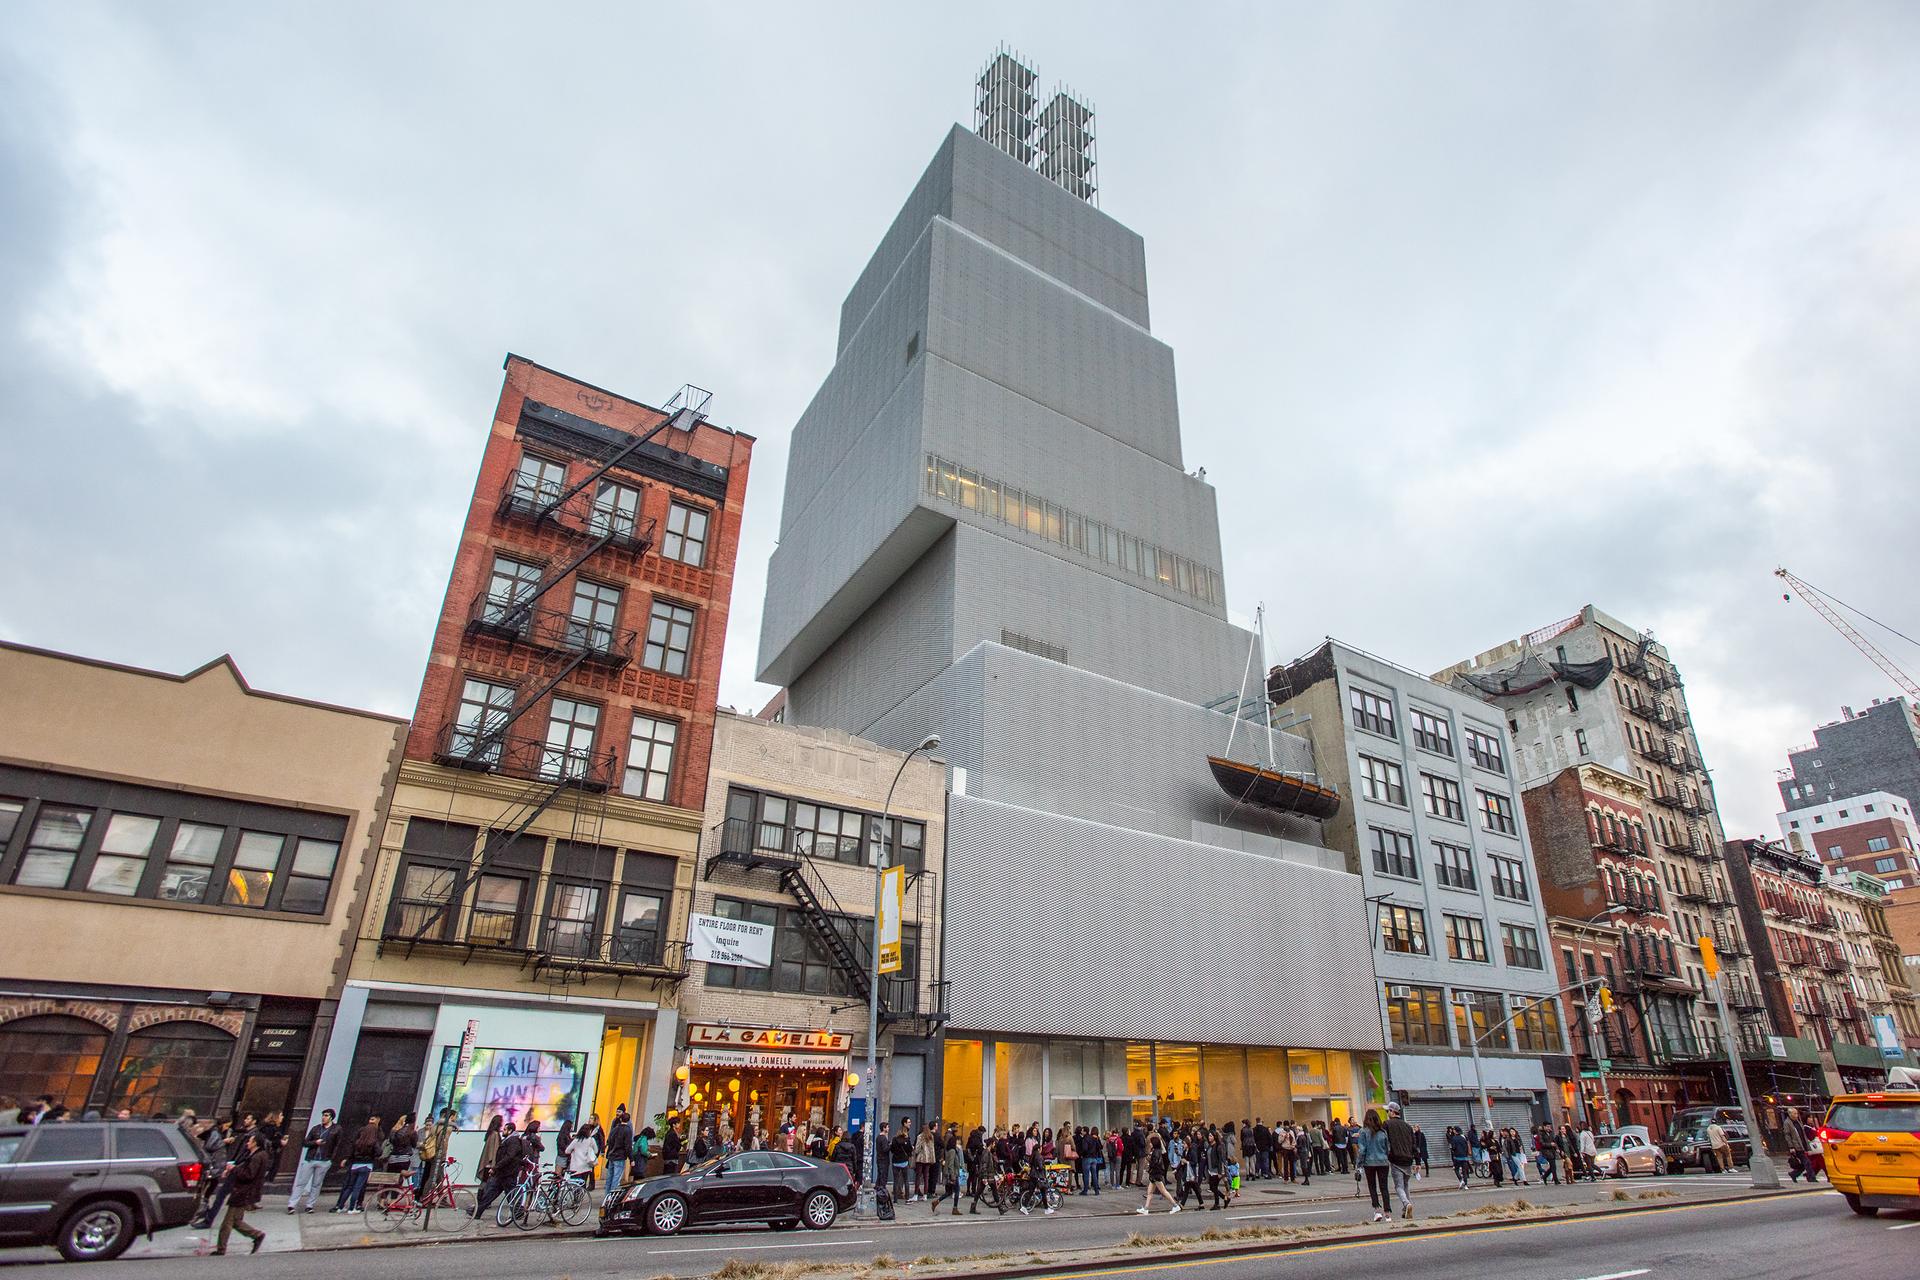 New Museum exterior in the Lower East Side